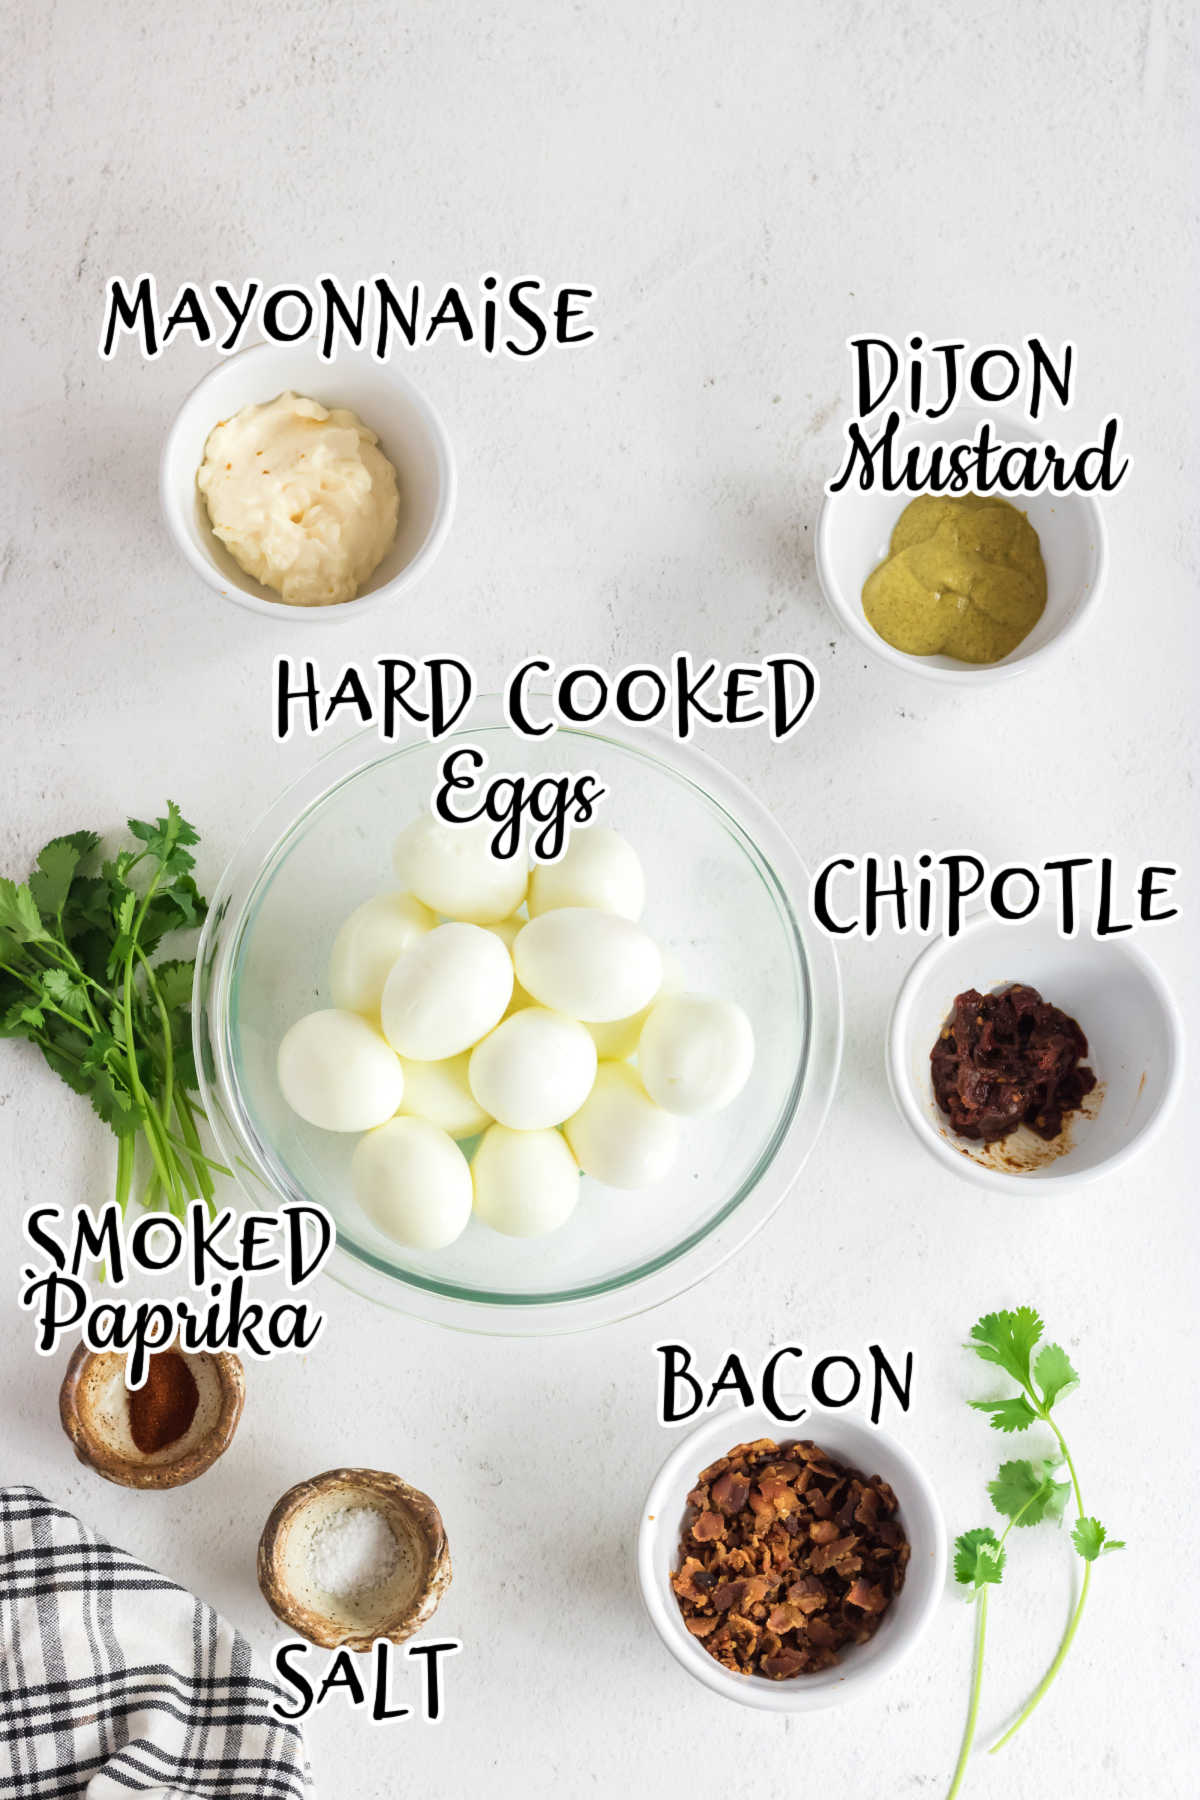 Labeled ingredients for deviled eggs.